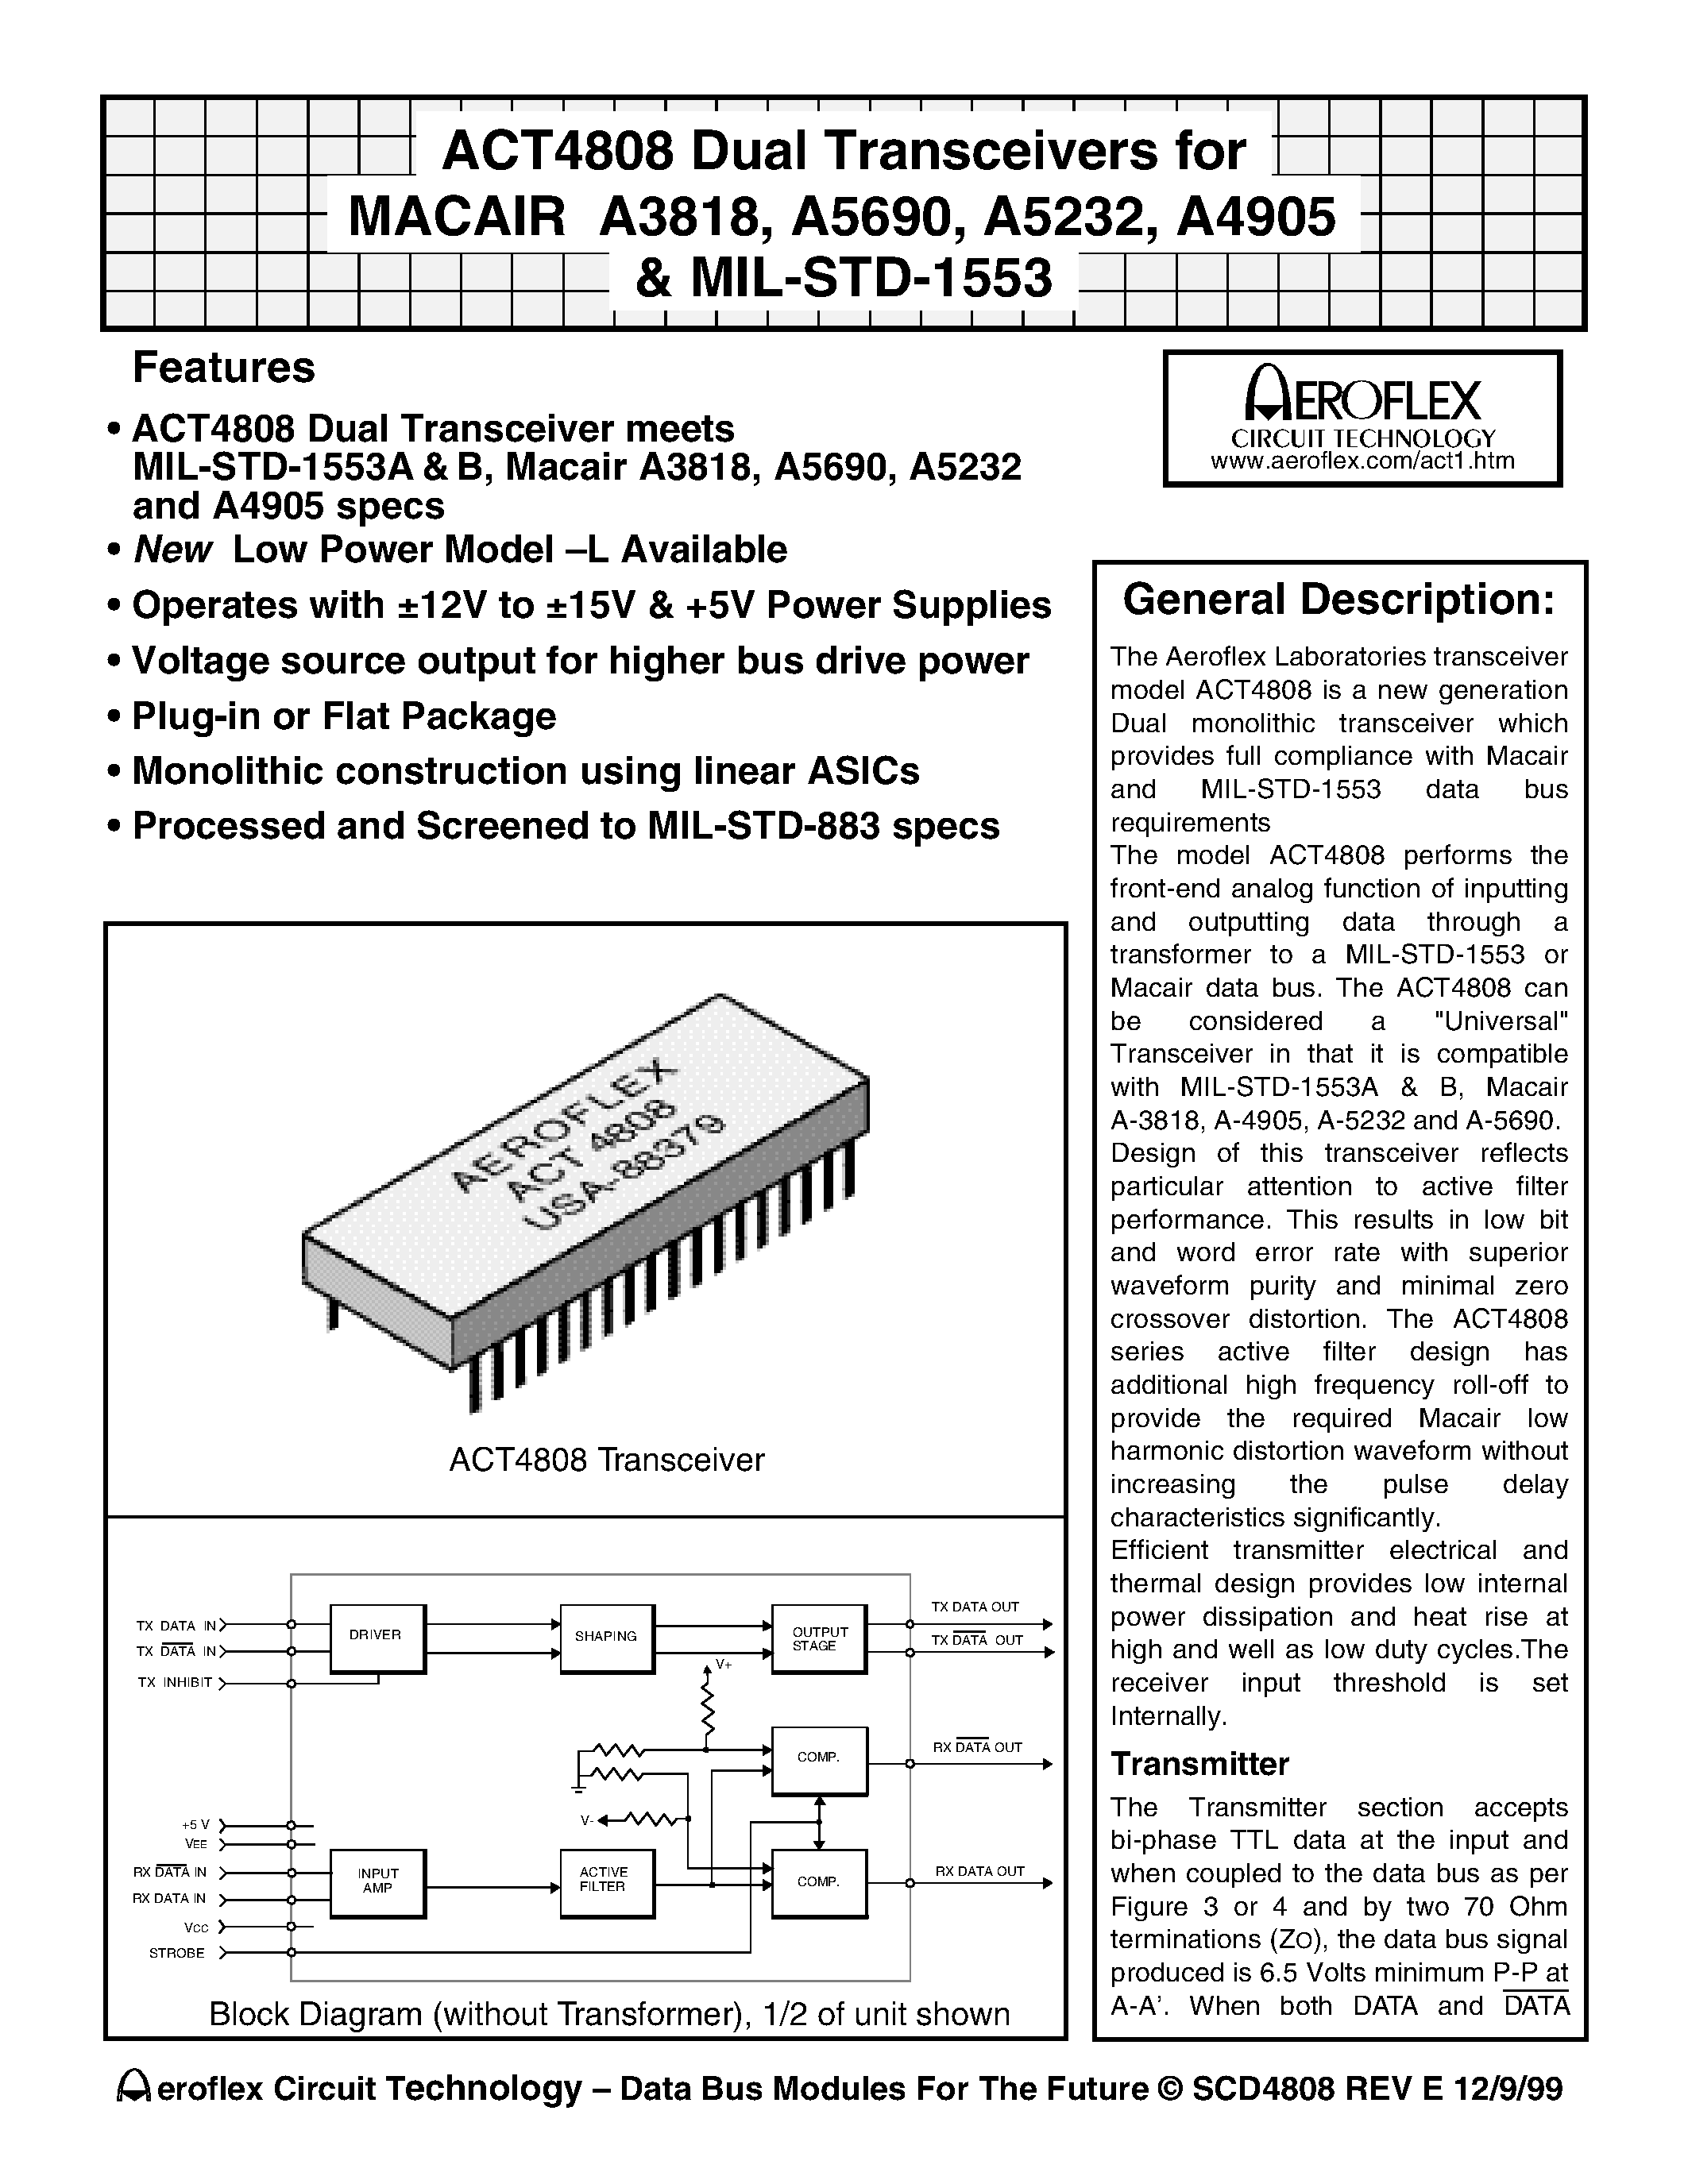 Datasheet ACT4808DI - ACT4808 DUAL TRANSCEIVERS FOR MACAIR A3818/ A5690/ A5232/ A4905 & MIL-STD-1553 page 1